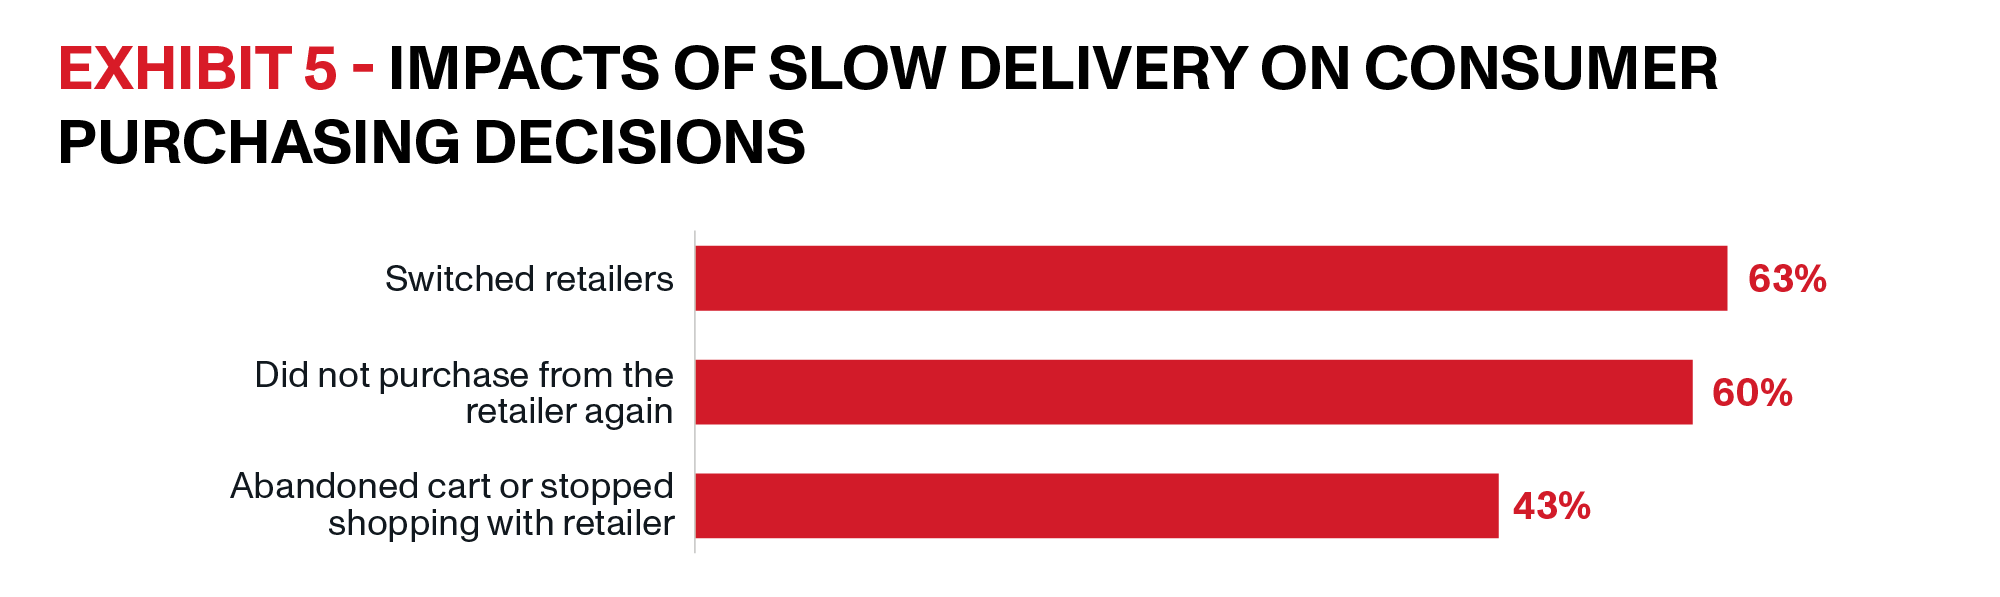 OnTrac | Parcel Delivery Solutions Whitepaper | Exhibit 5 | Exhibit 5 shows that slow delivery caused 63% of consumers to switch retailers, 60% to not purchase again from a retailer, and 43% to abandon their carts or stop shopping with that retailer.